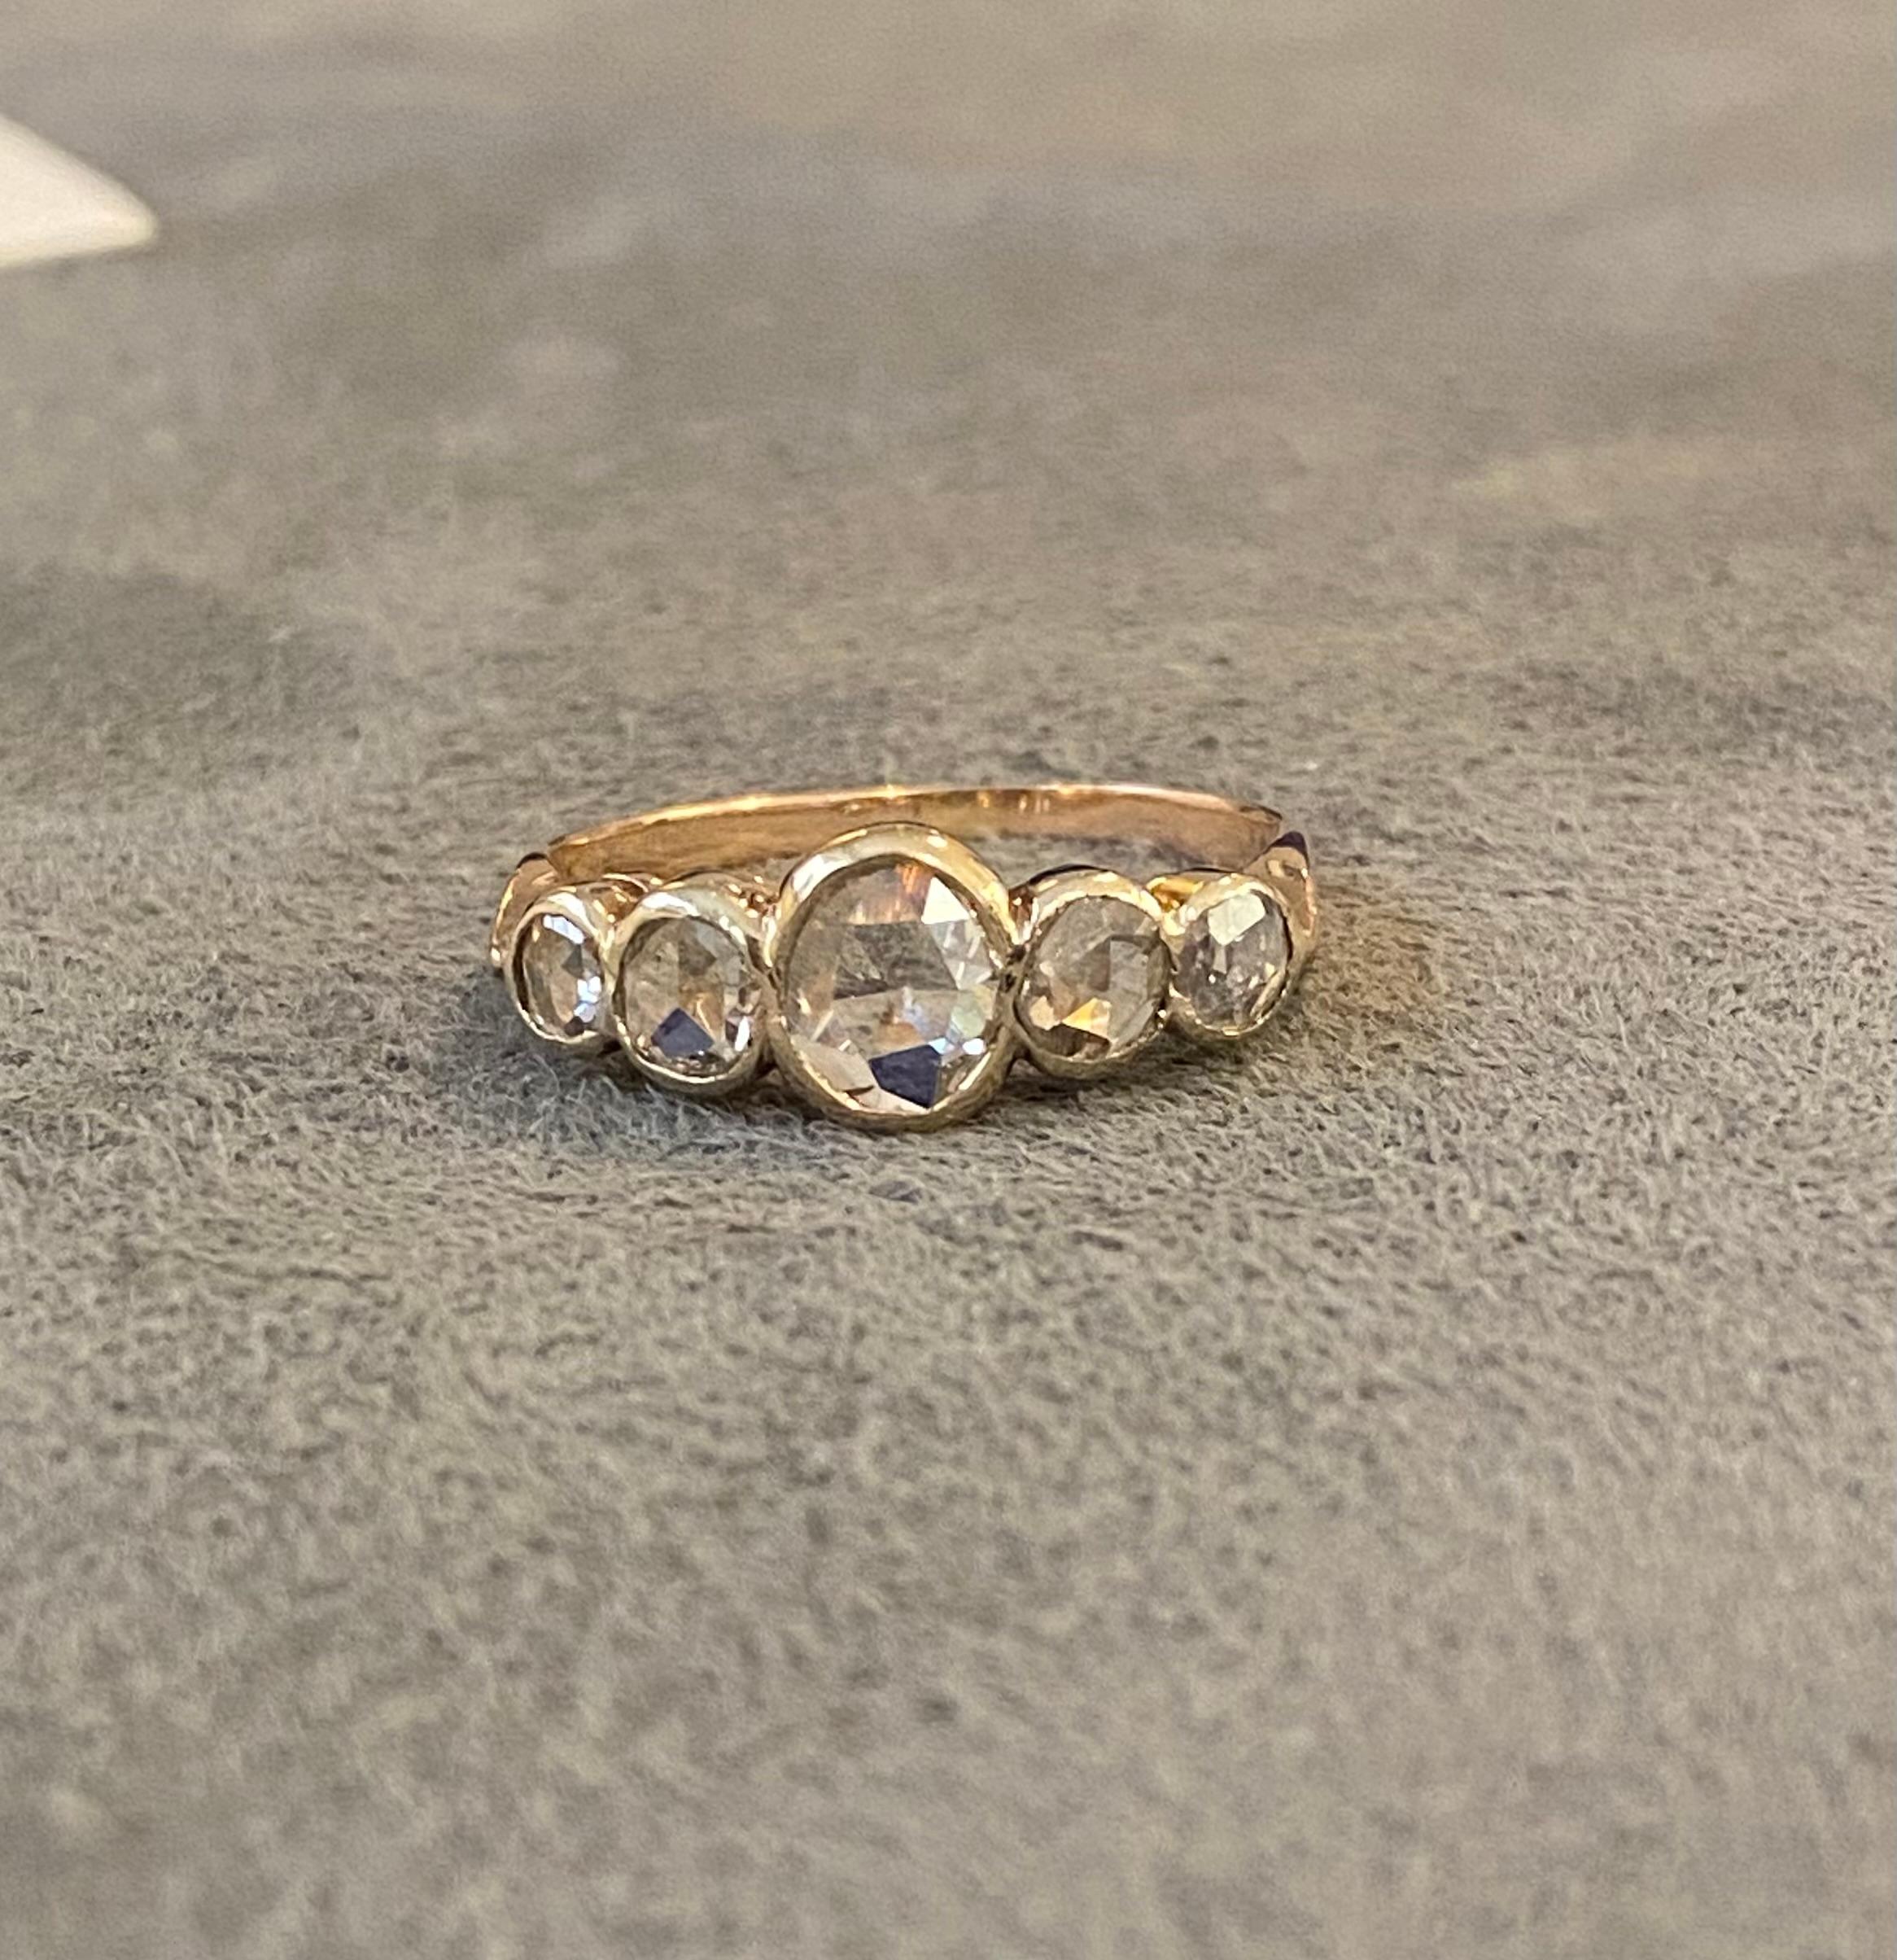 An 18k gold ring (probably antique) set with five rose cut diamonds (I1, O-P) of approximately 0.90 cts. 1886 and 1911 engraved inside ring. 